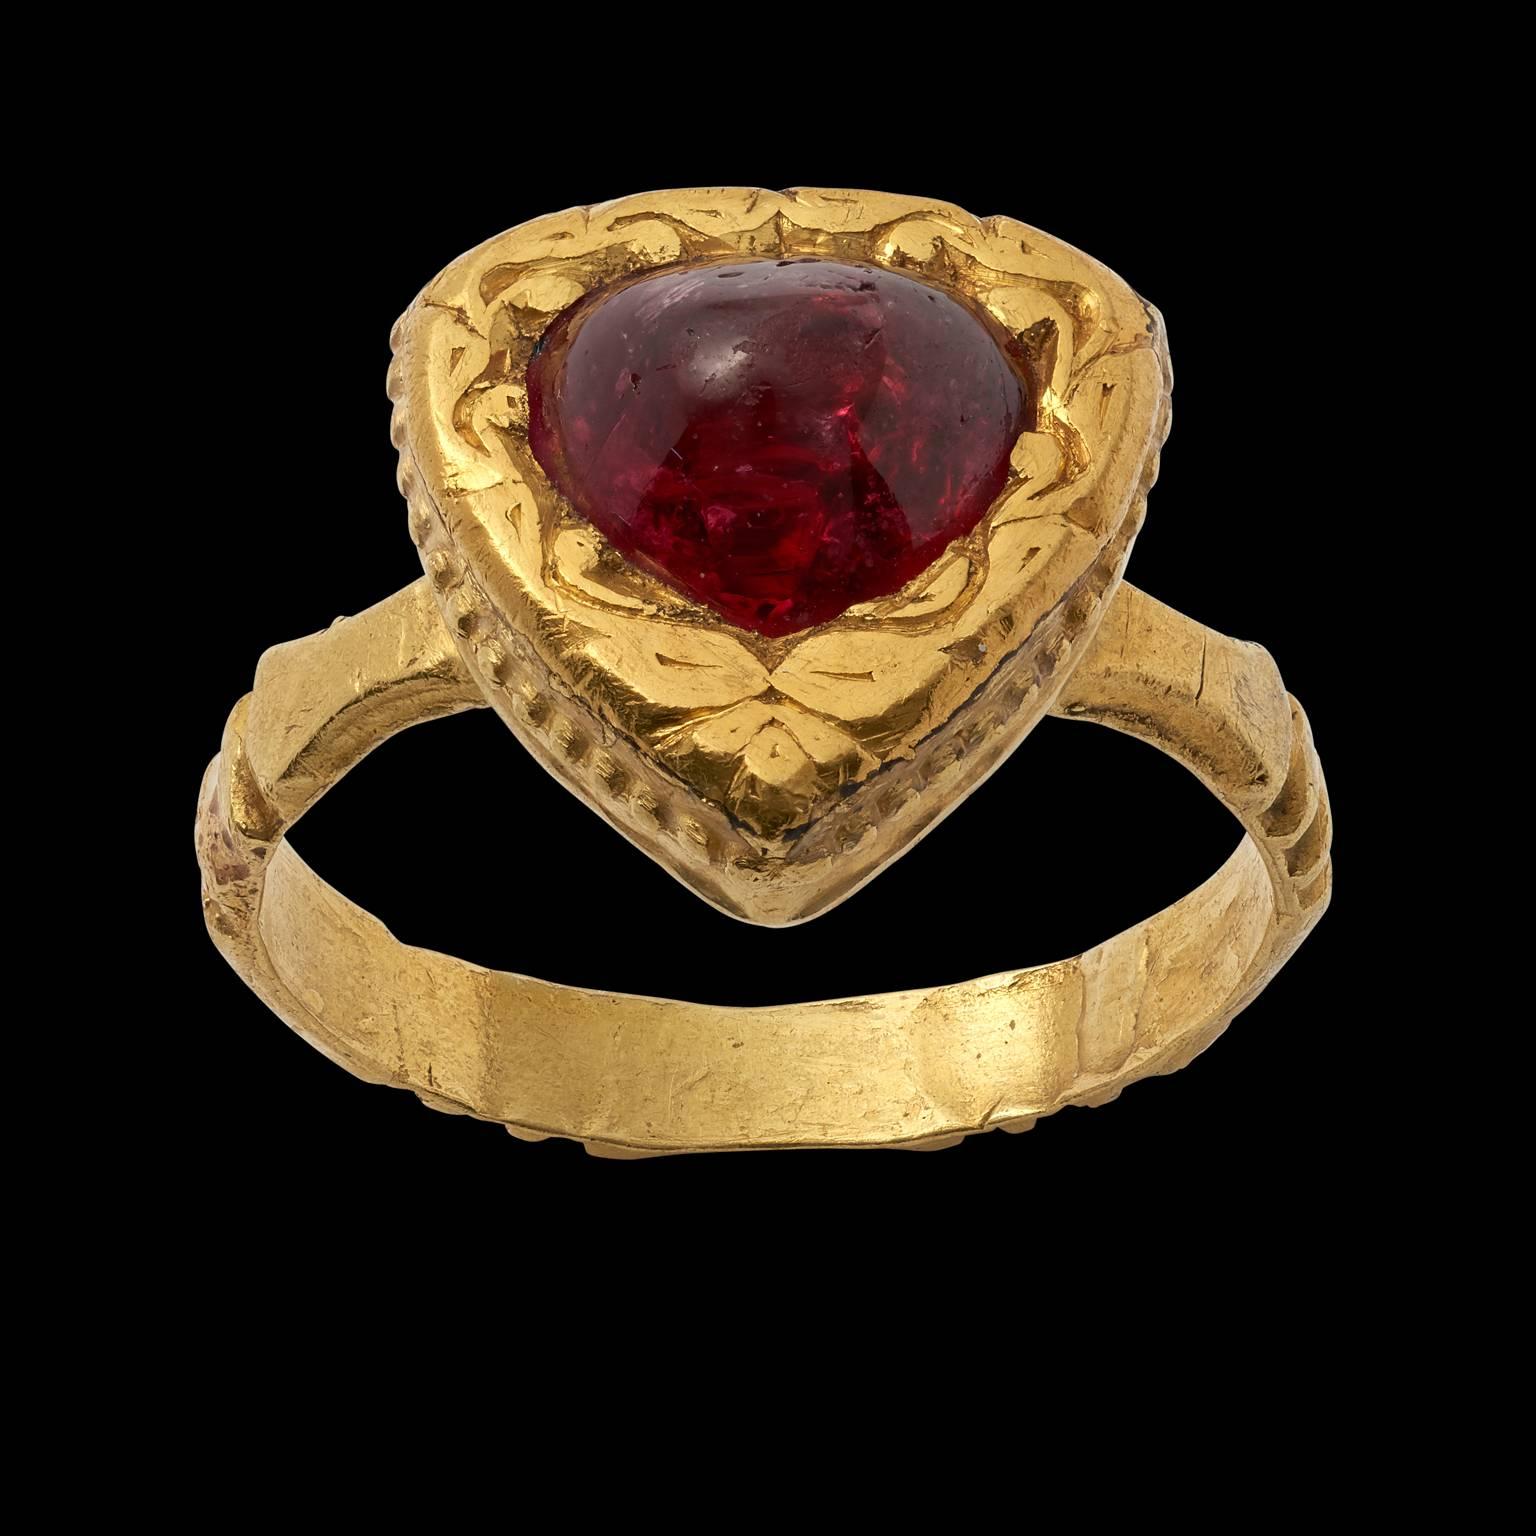 Ring
Deccan, South India
19th century

Fabricated from pure gold with a central domed cabouchon ruby. The shoulders of the ring have a design as does the top surround.

 UK finger size Q